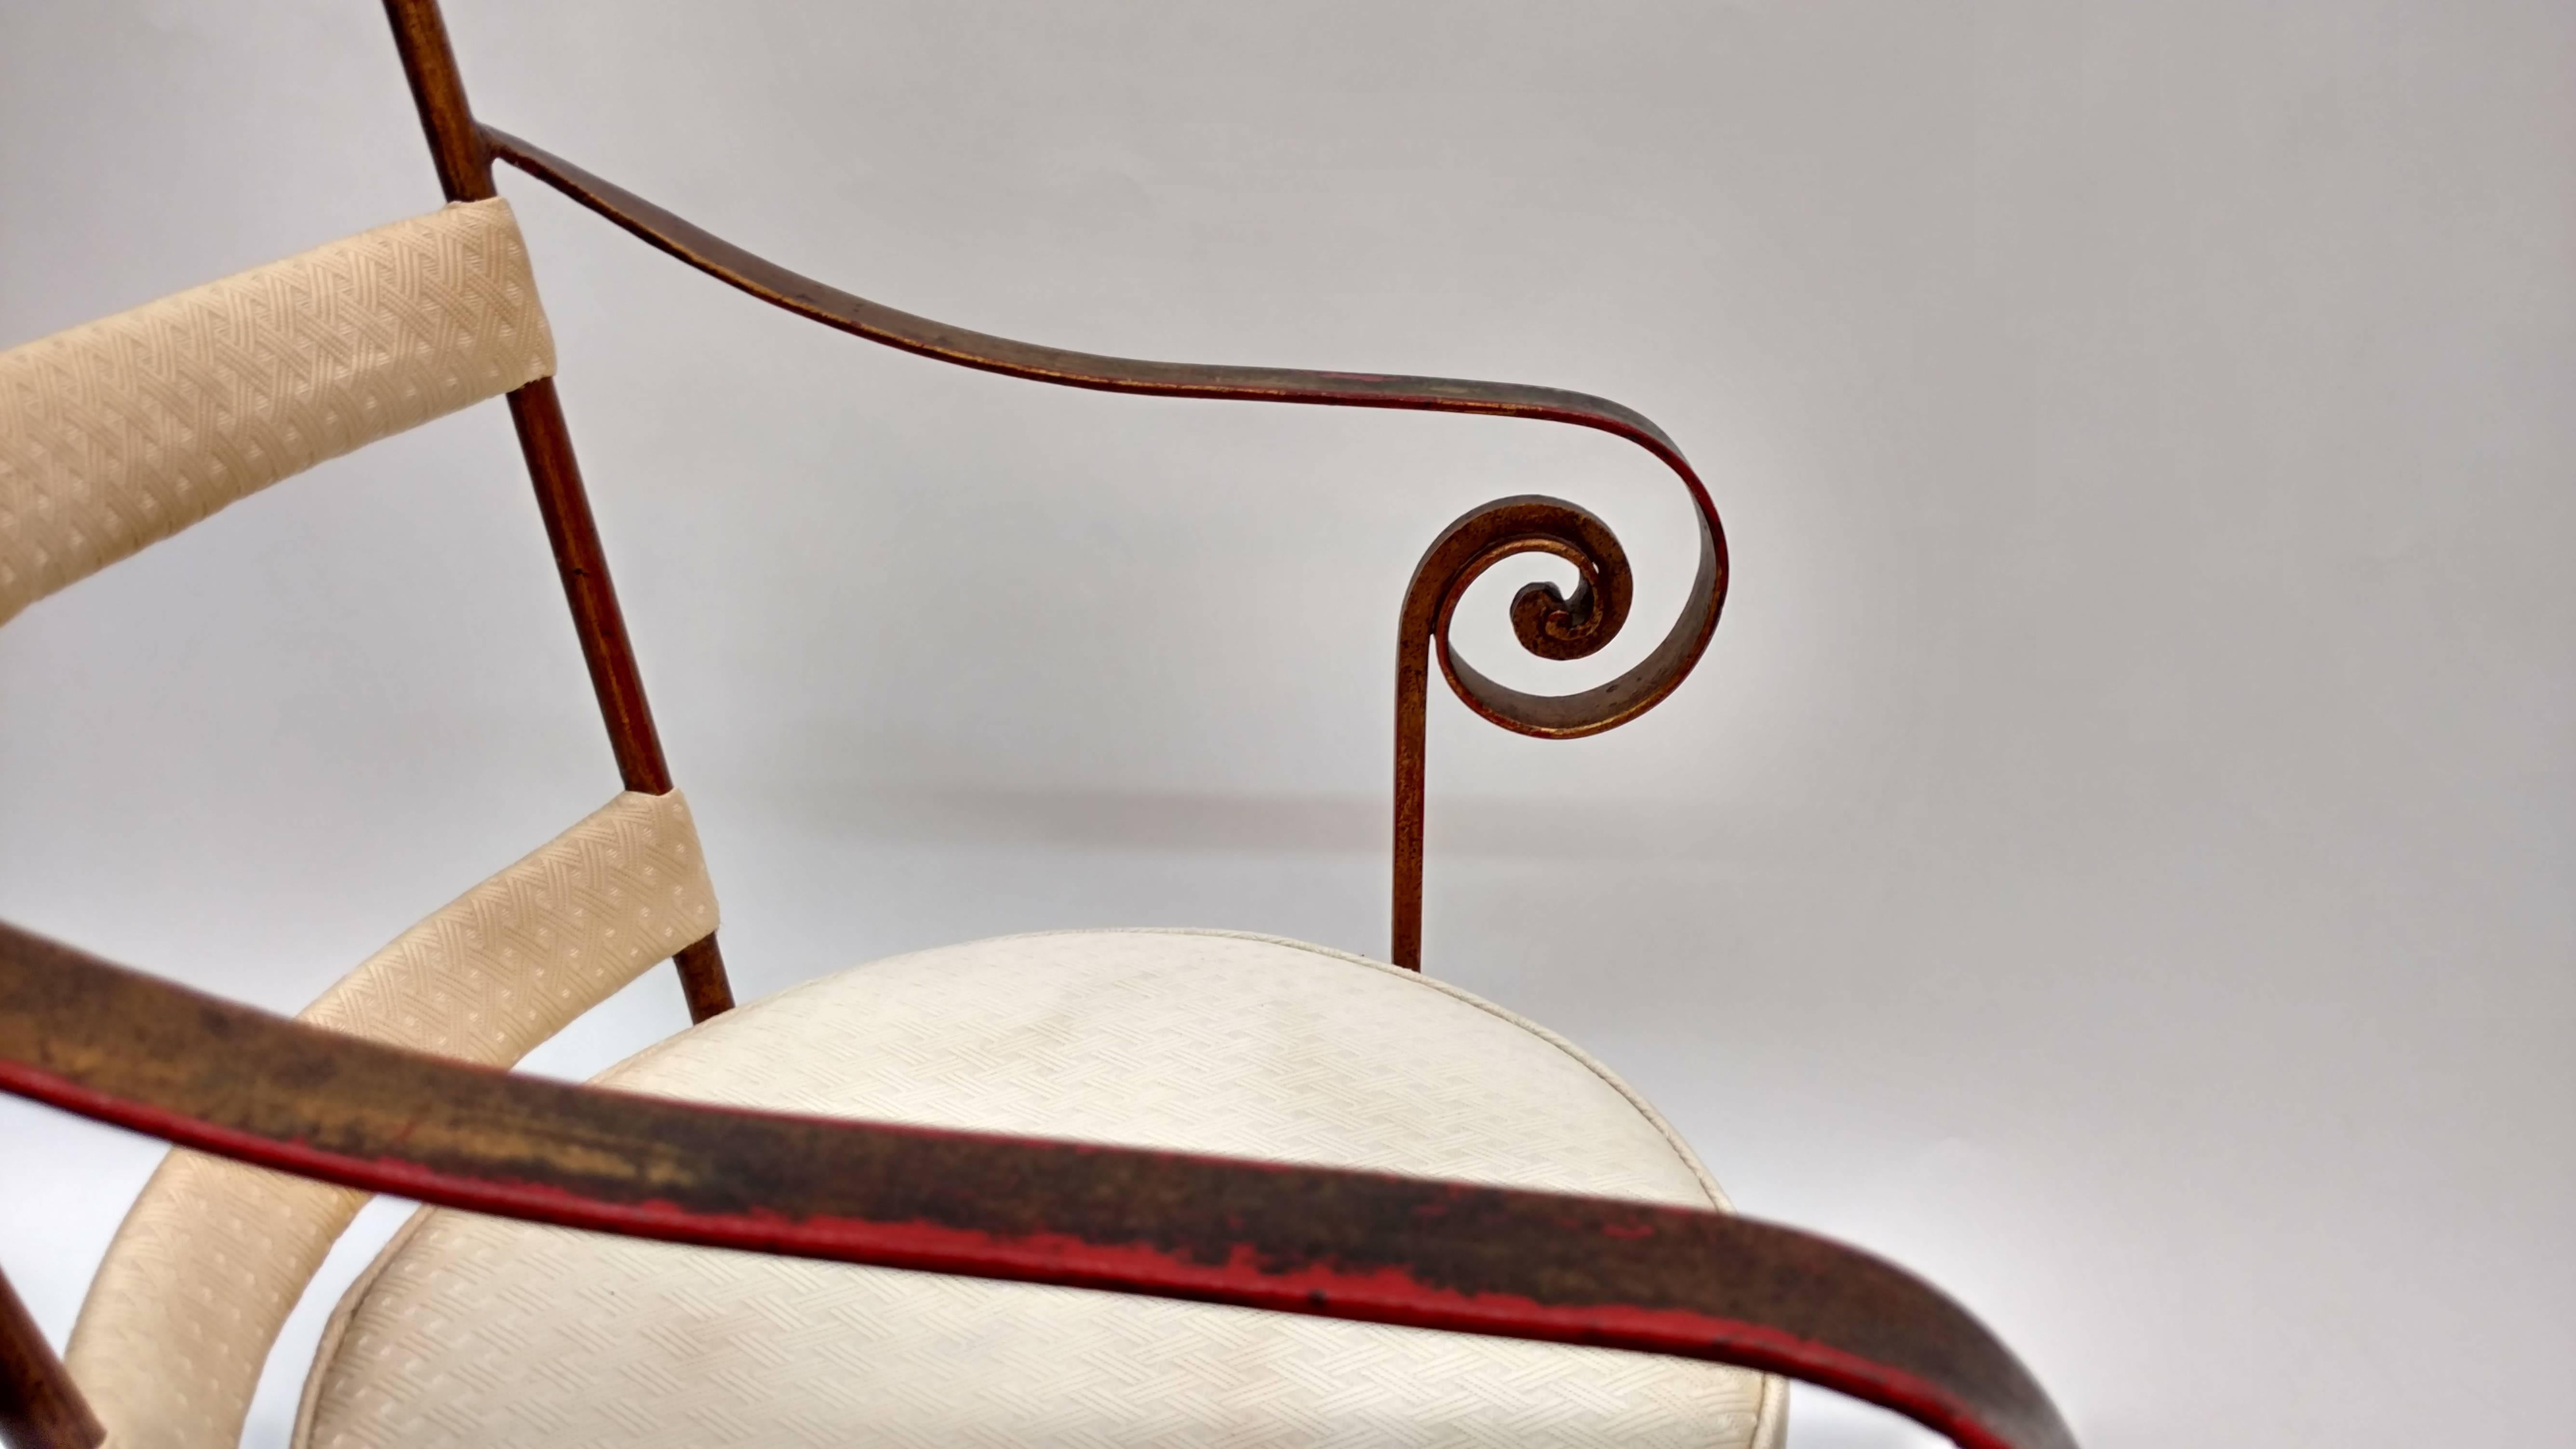 Hand-wrought iron chair with scroll arms.
Made in Italy, circa 1950s.
It needs new upholstery.